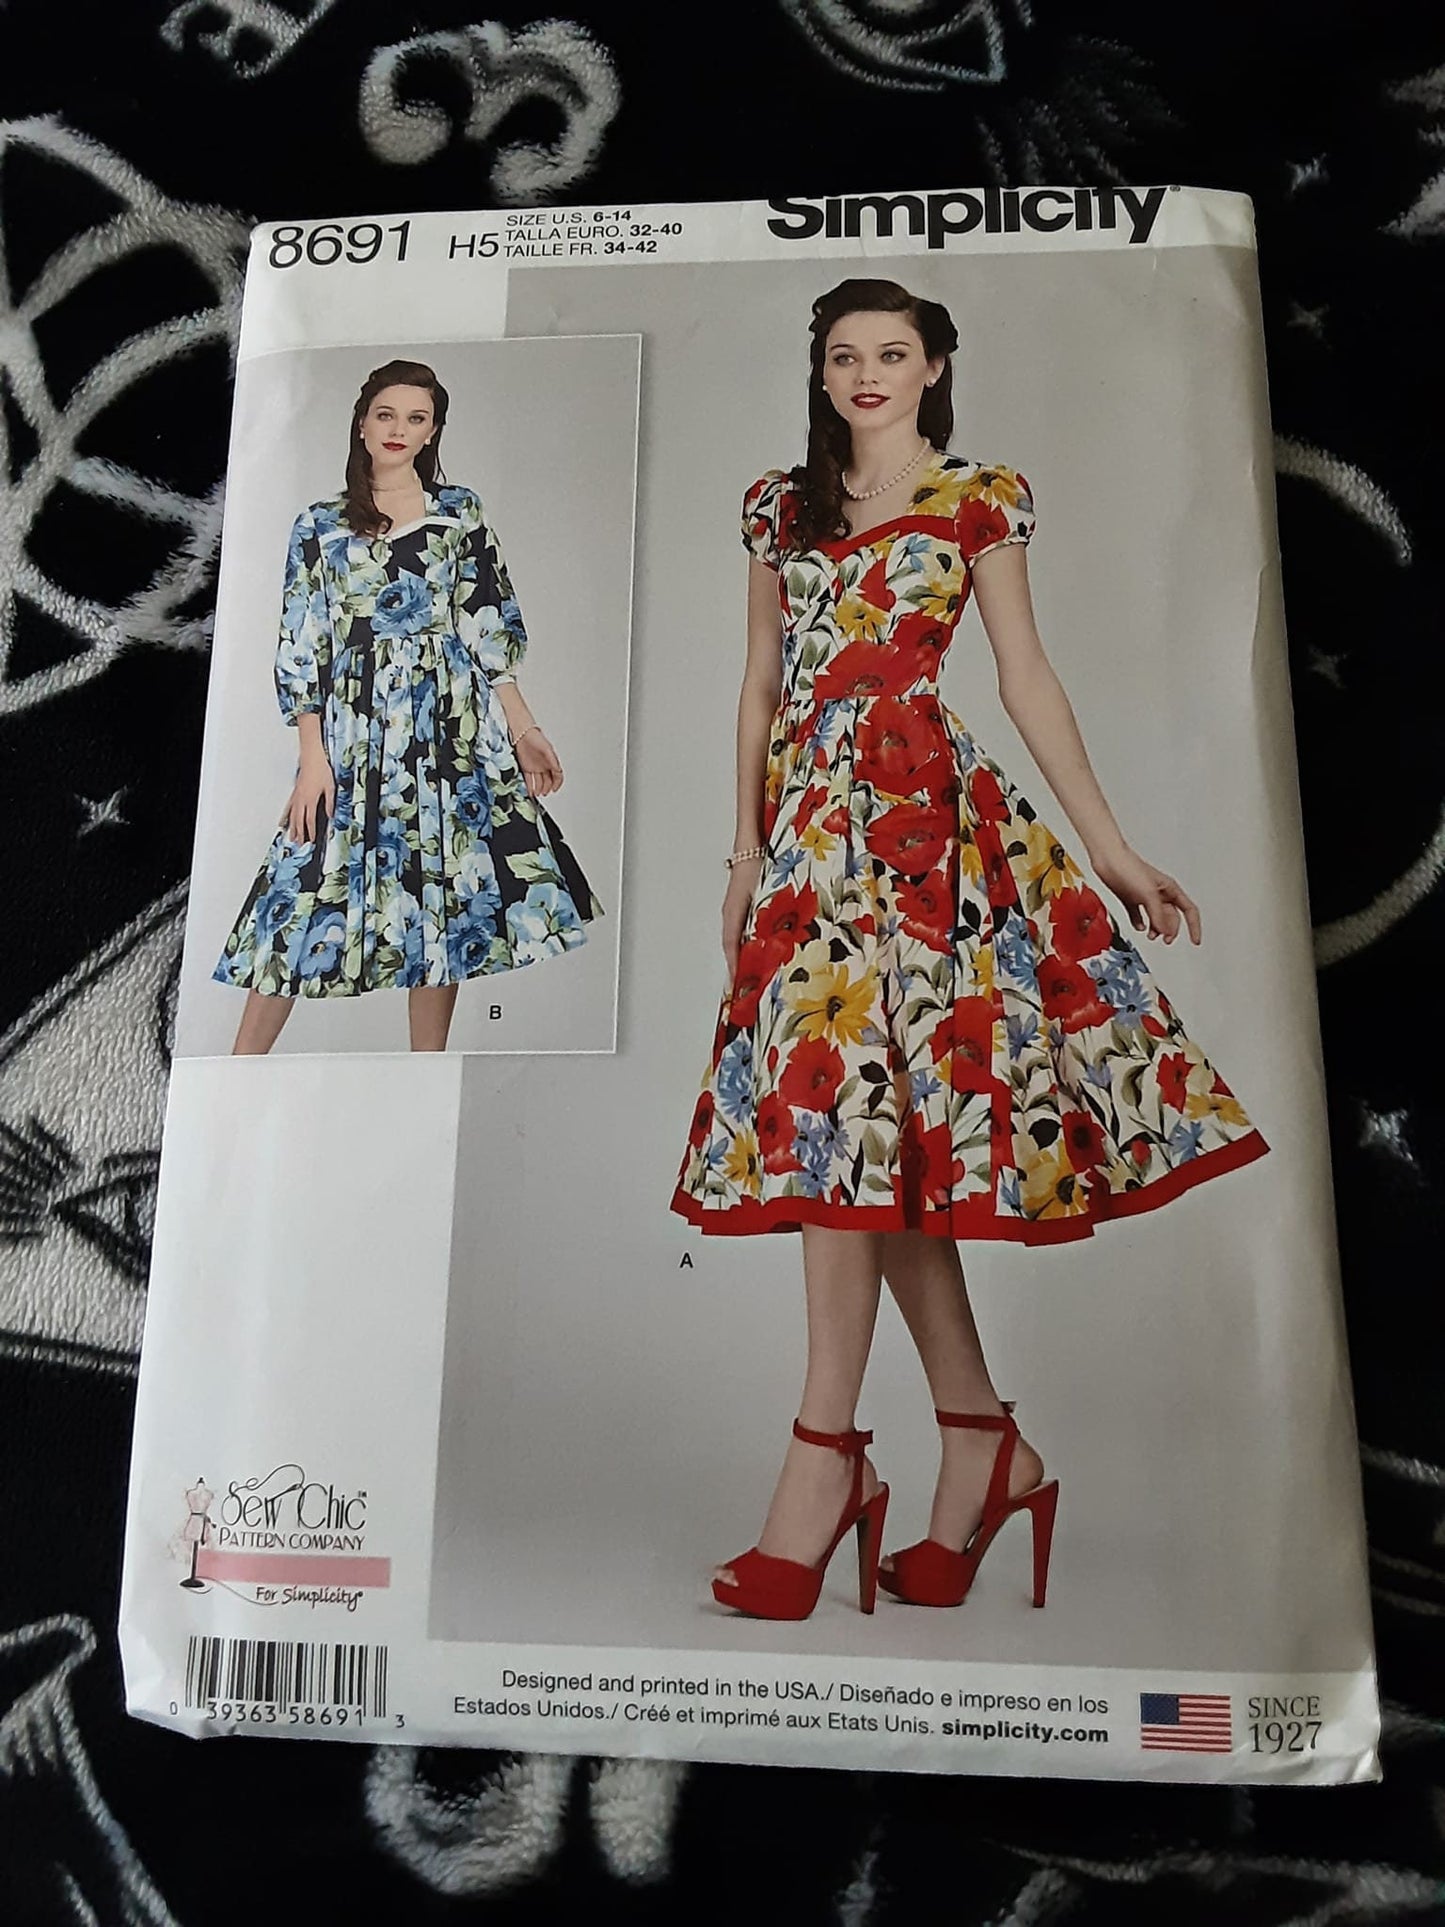 Vintage 1950s inspired sewing pattern Simplicity 8691 Retro Swing Dress DIY US Size 6-14 Uncut